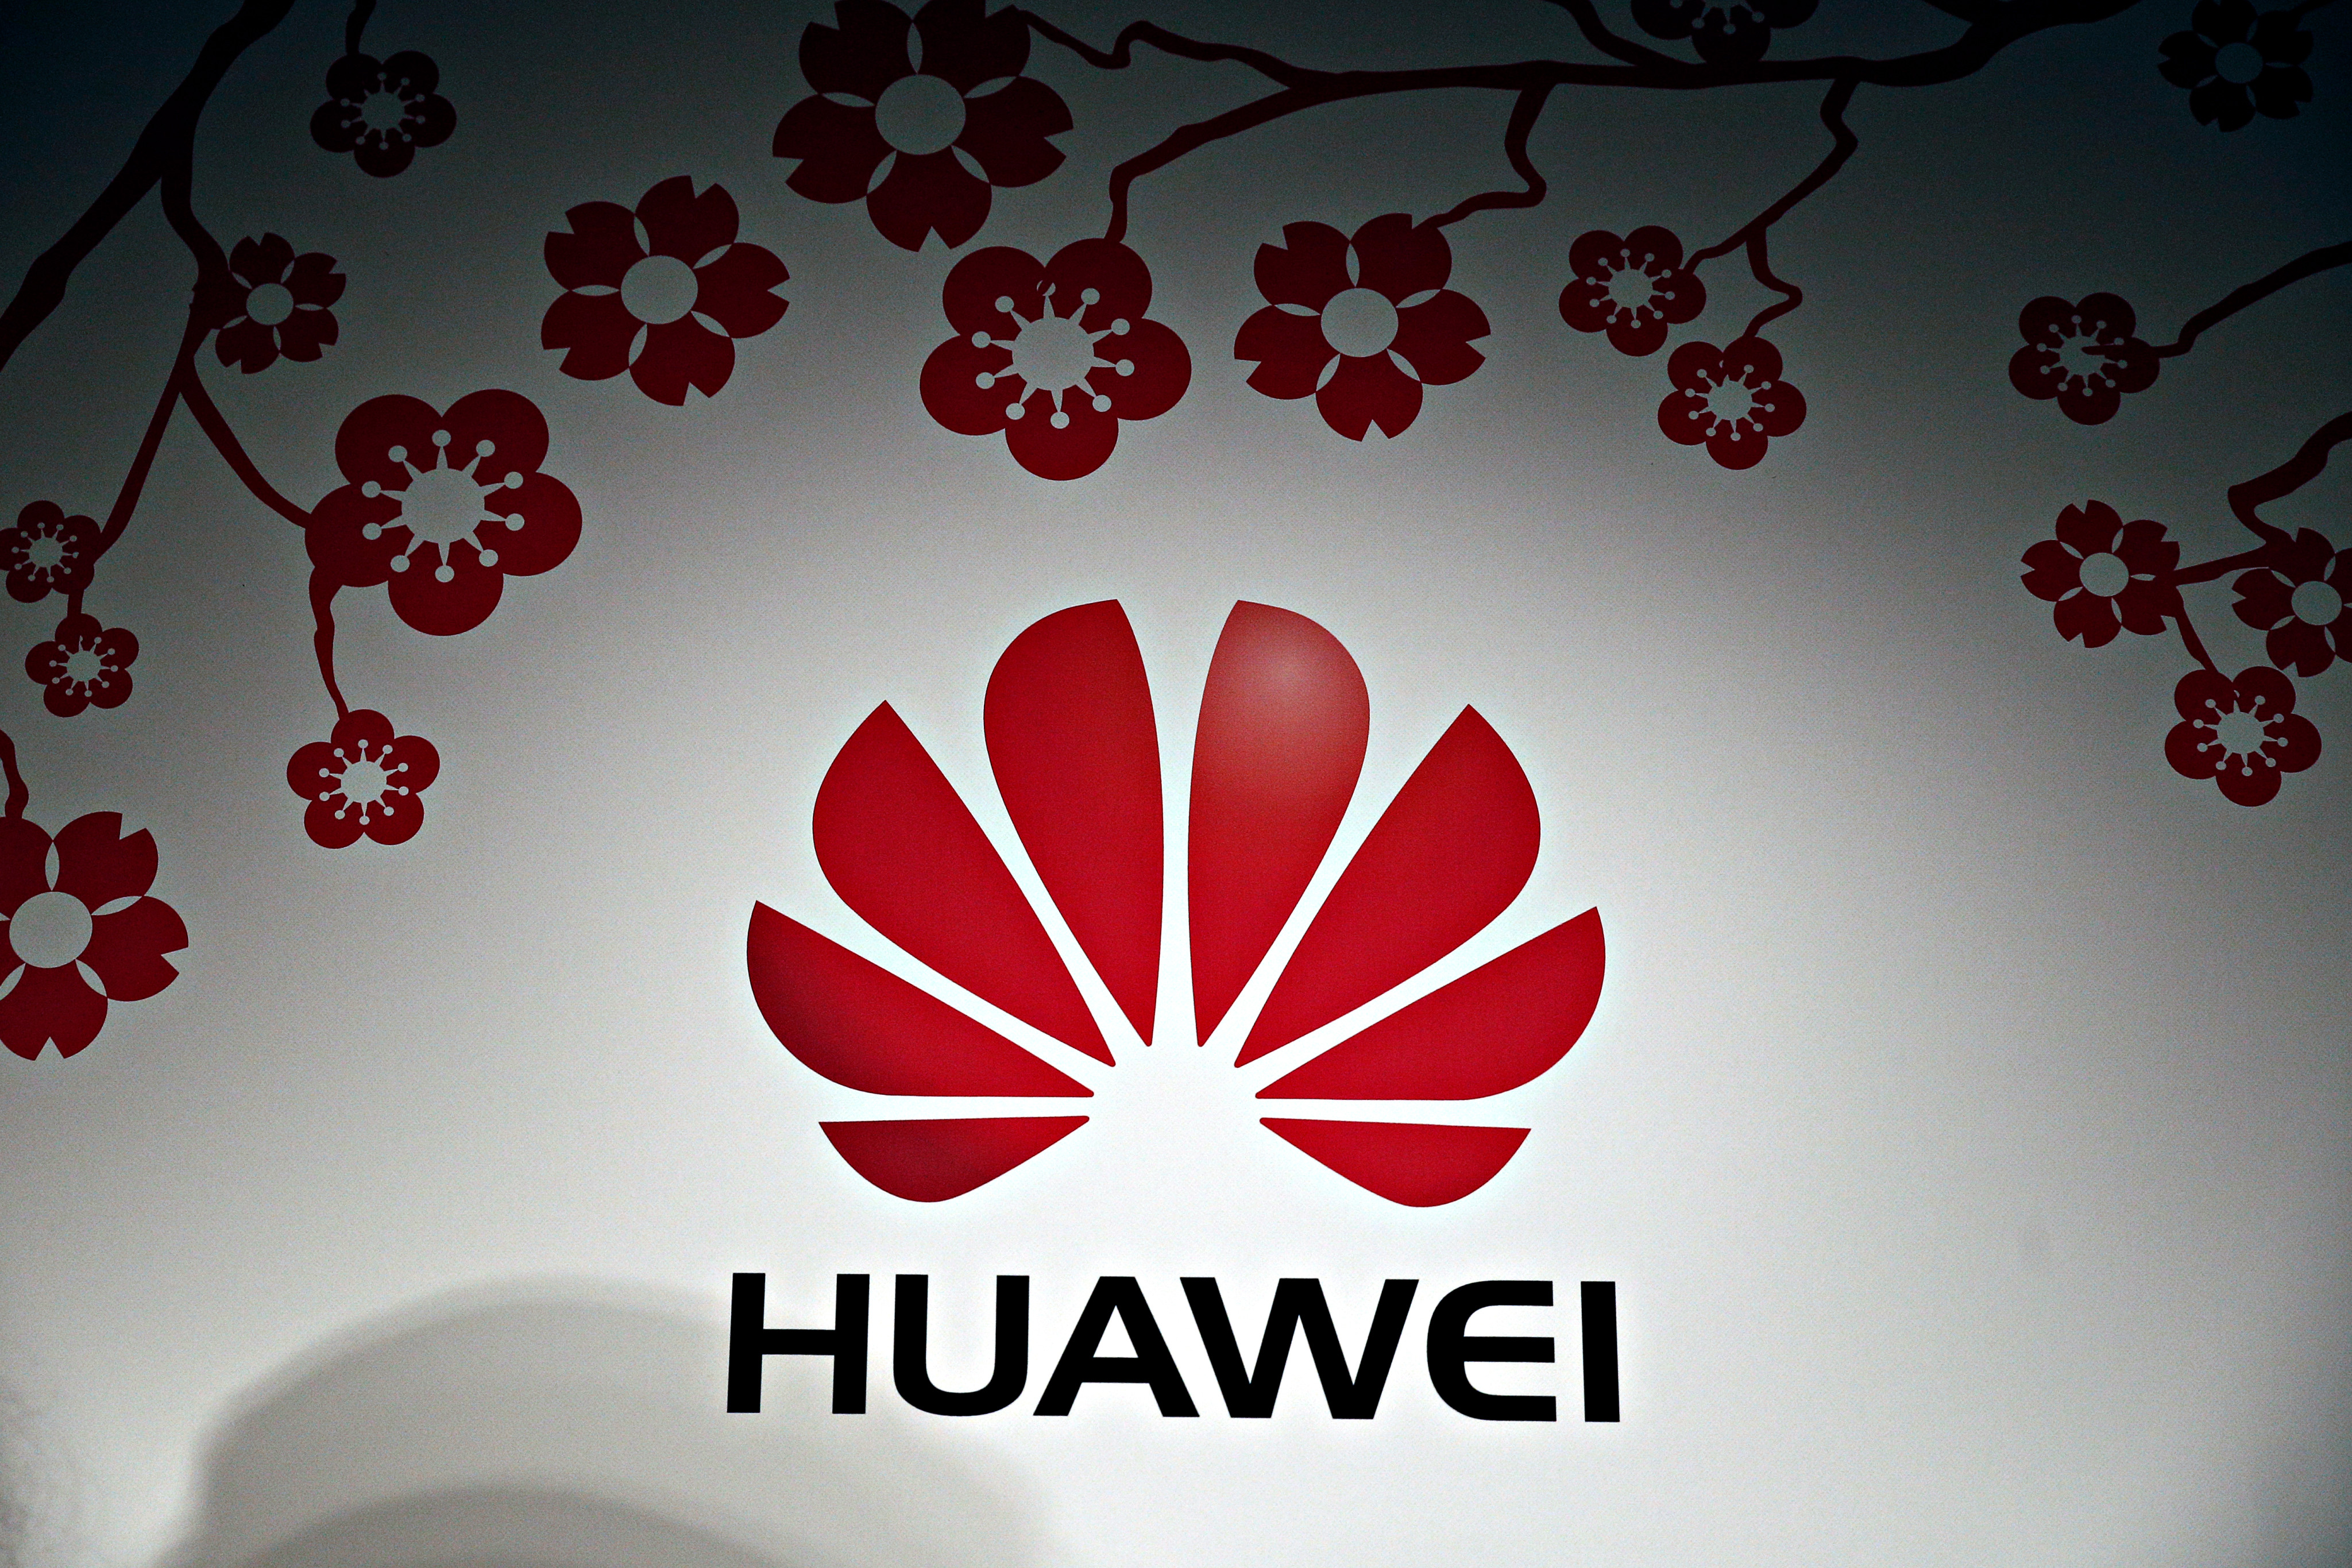 Huawei is exploring new business opportunities. Photo: Shutterstock
